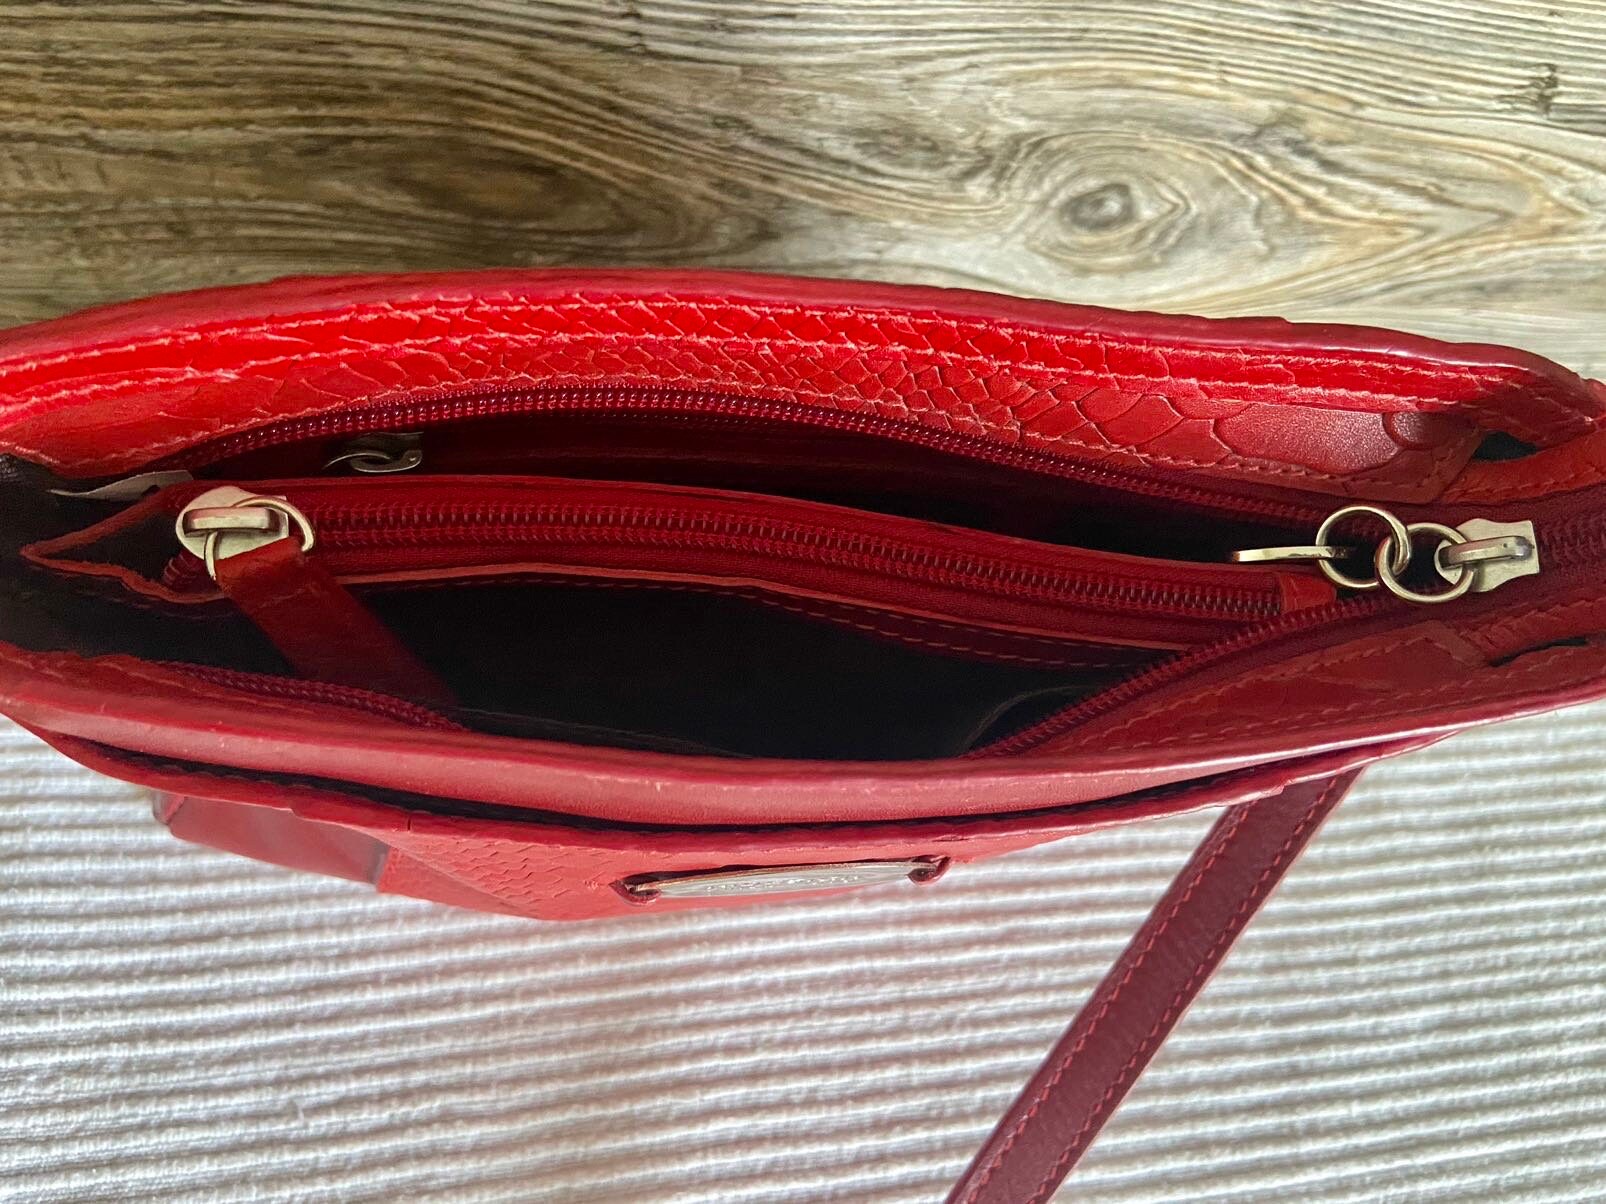 HIDESIGN red leather bag  Red leather bag, Bags, Leather